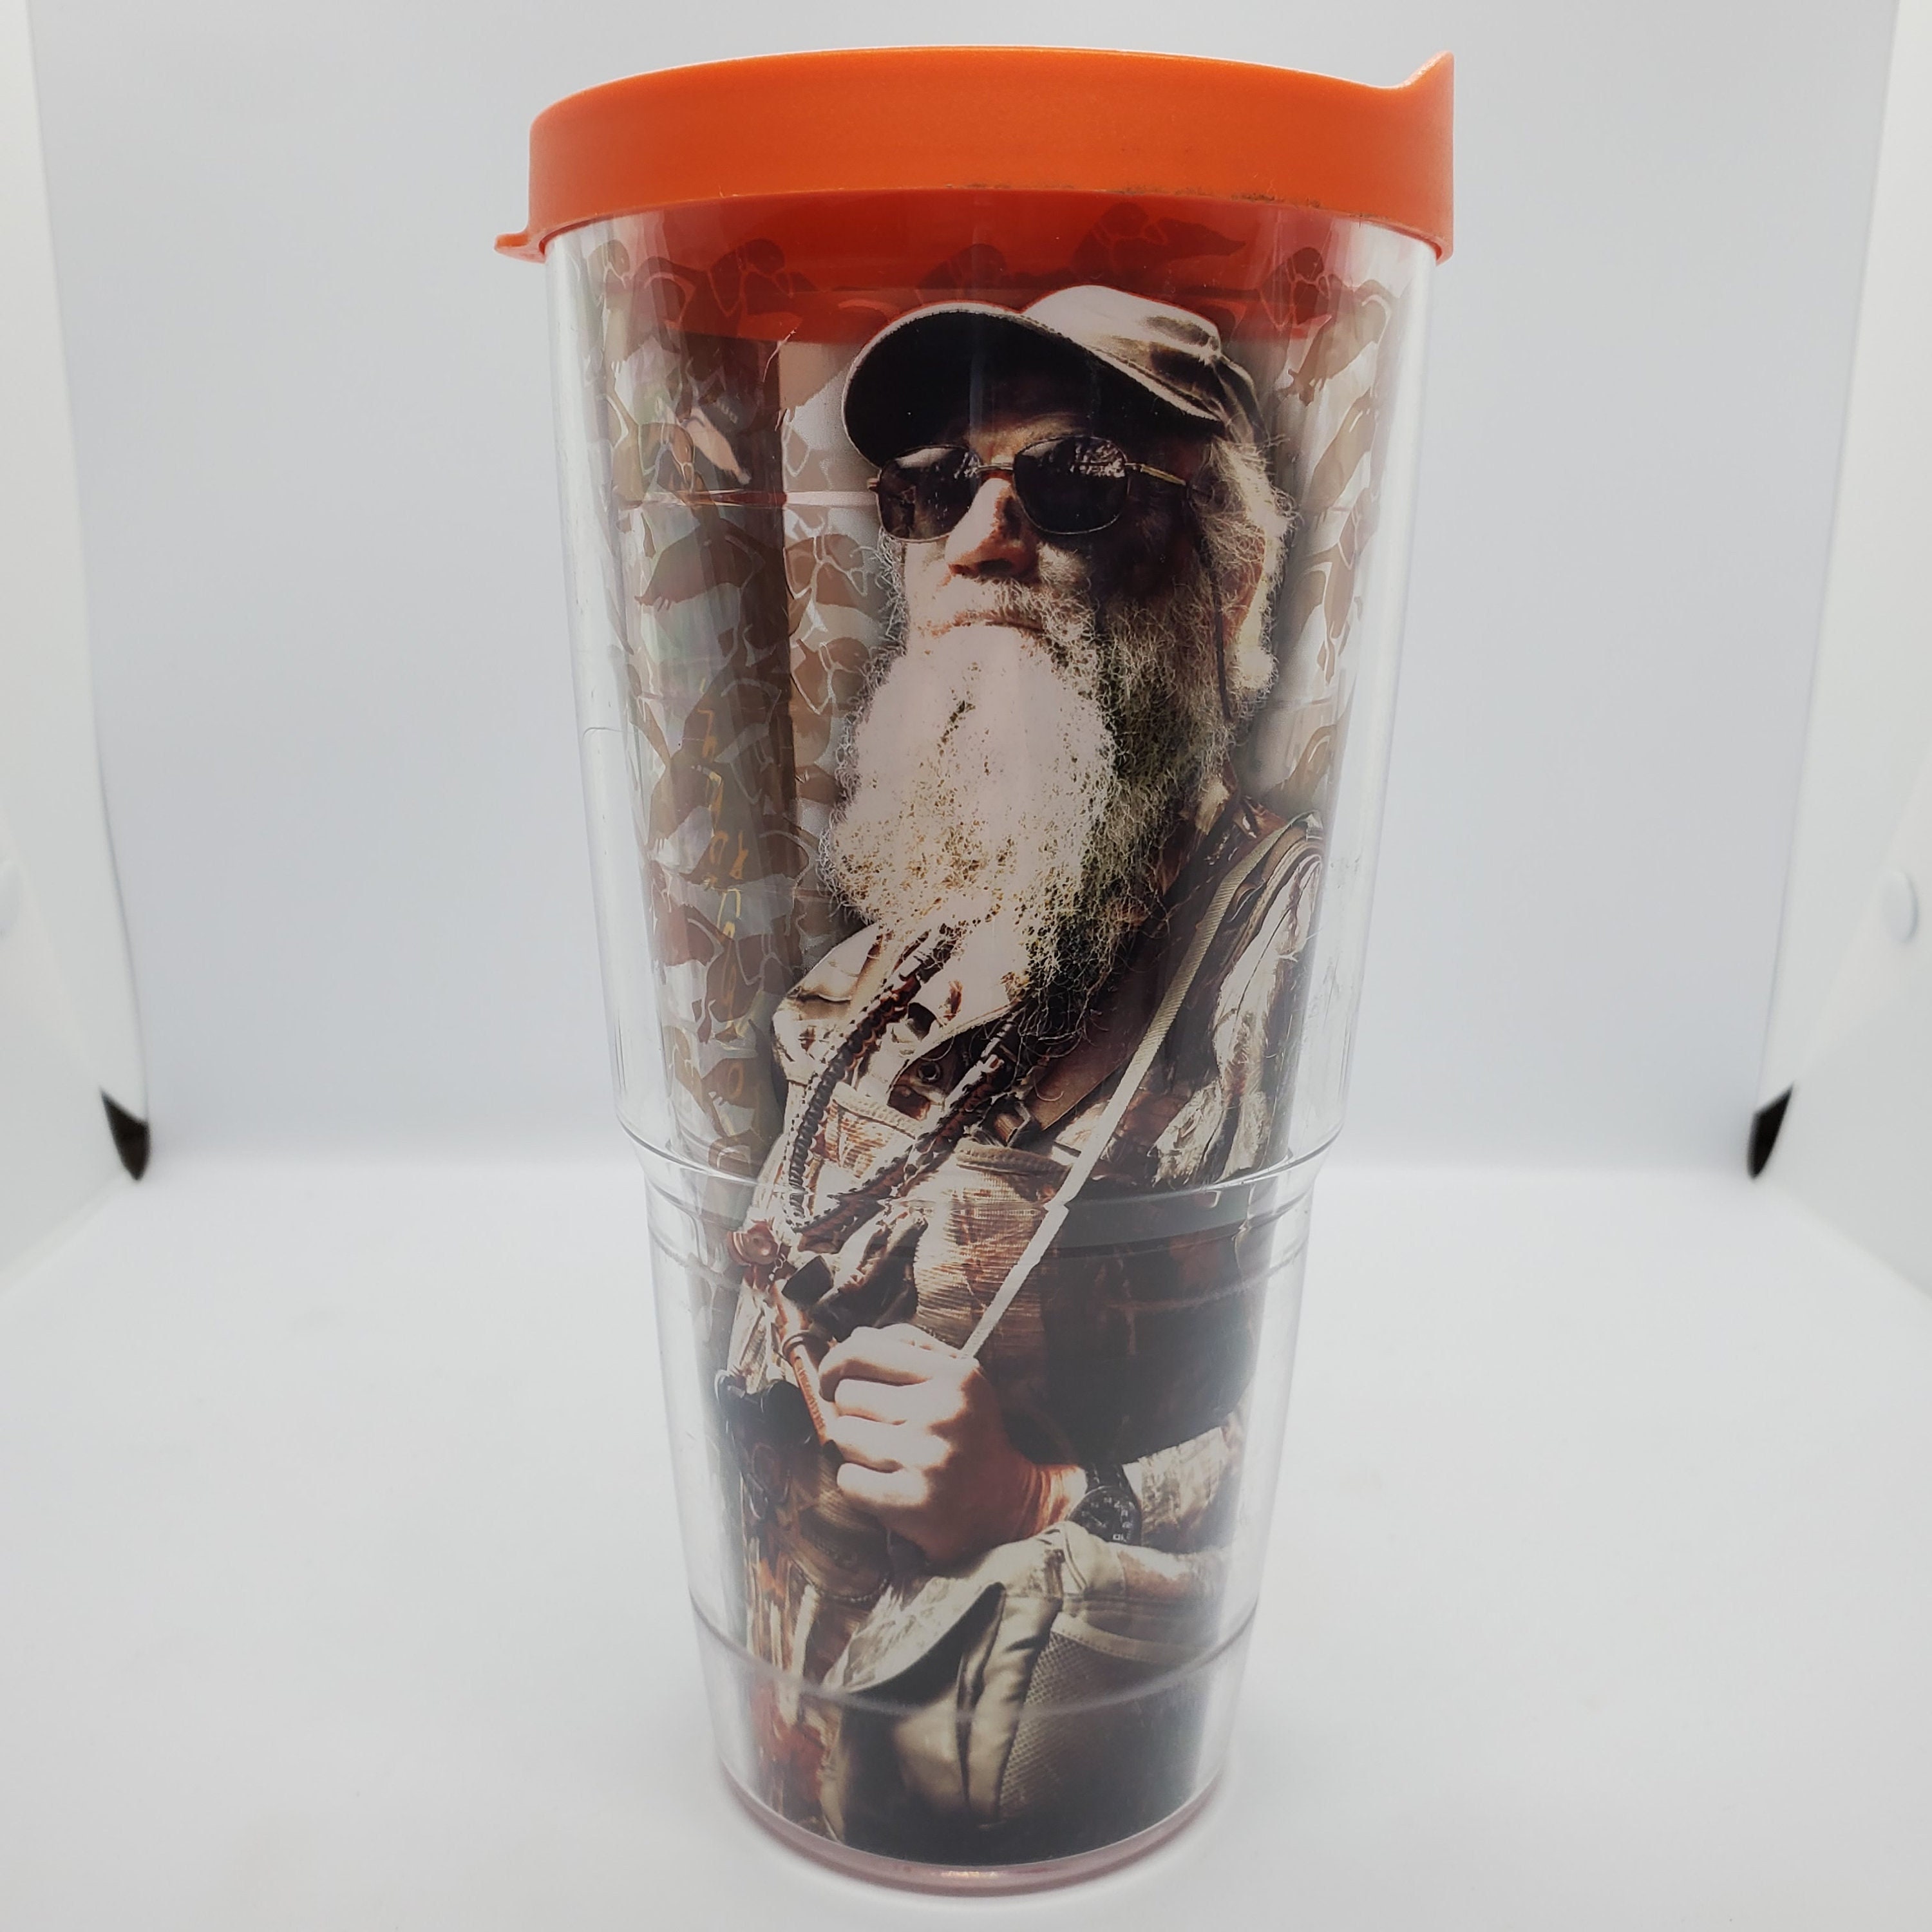 Tervis Disney - Classic Characters Tumbler with Wrap and Black Lid 24oz,  Clear